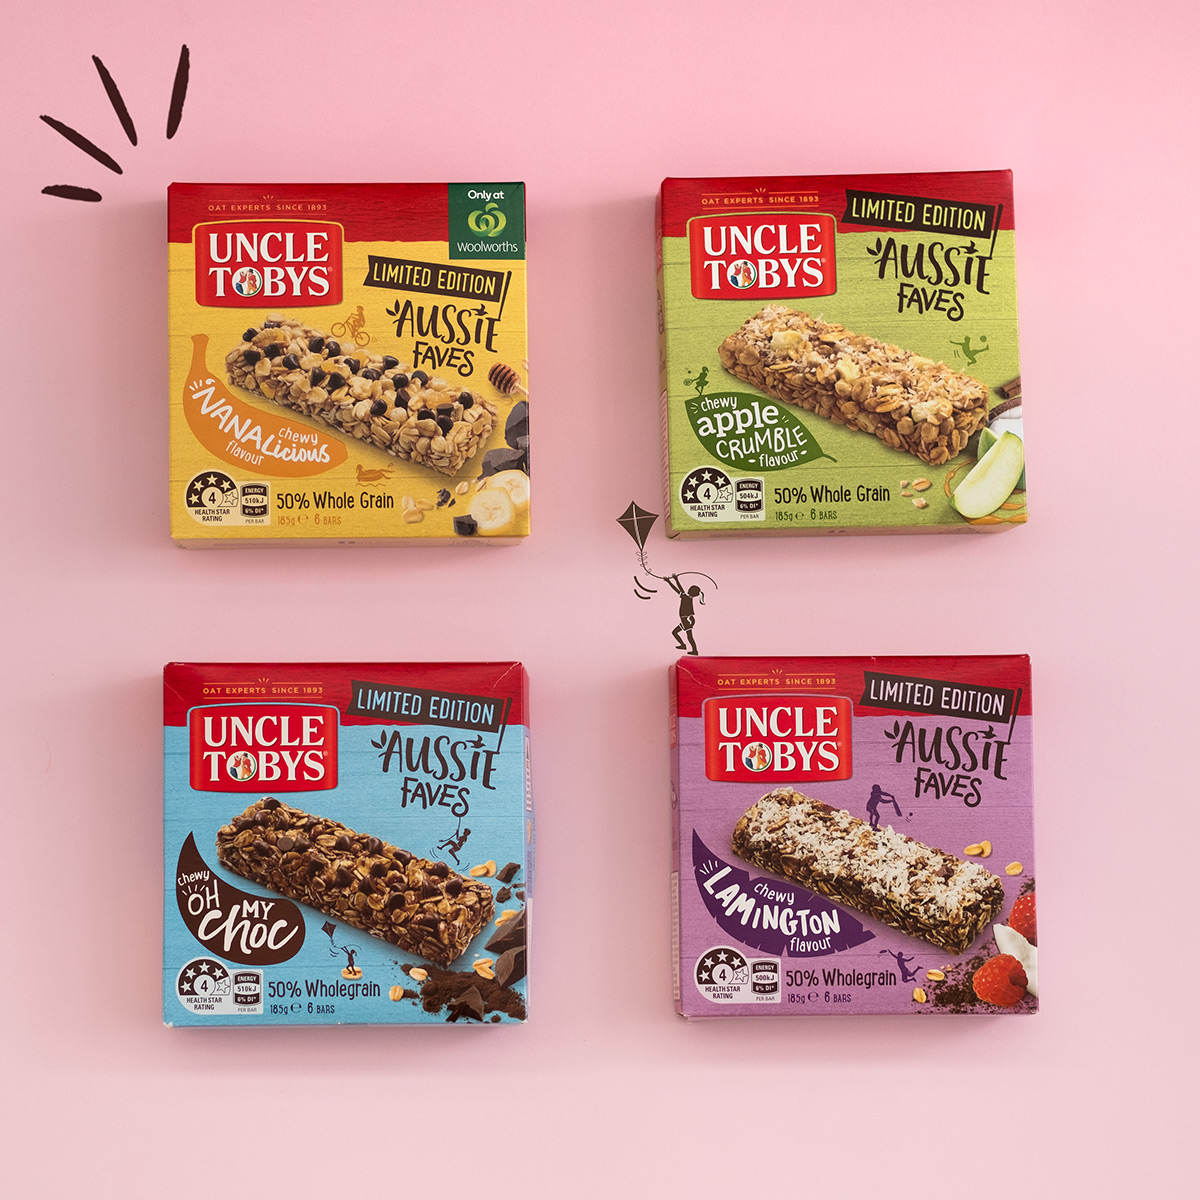 nestle-aussie-faves-boxer-and-co-redesign-muesli